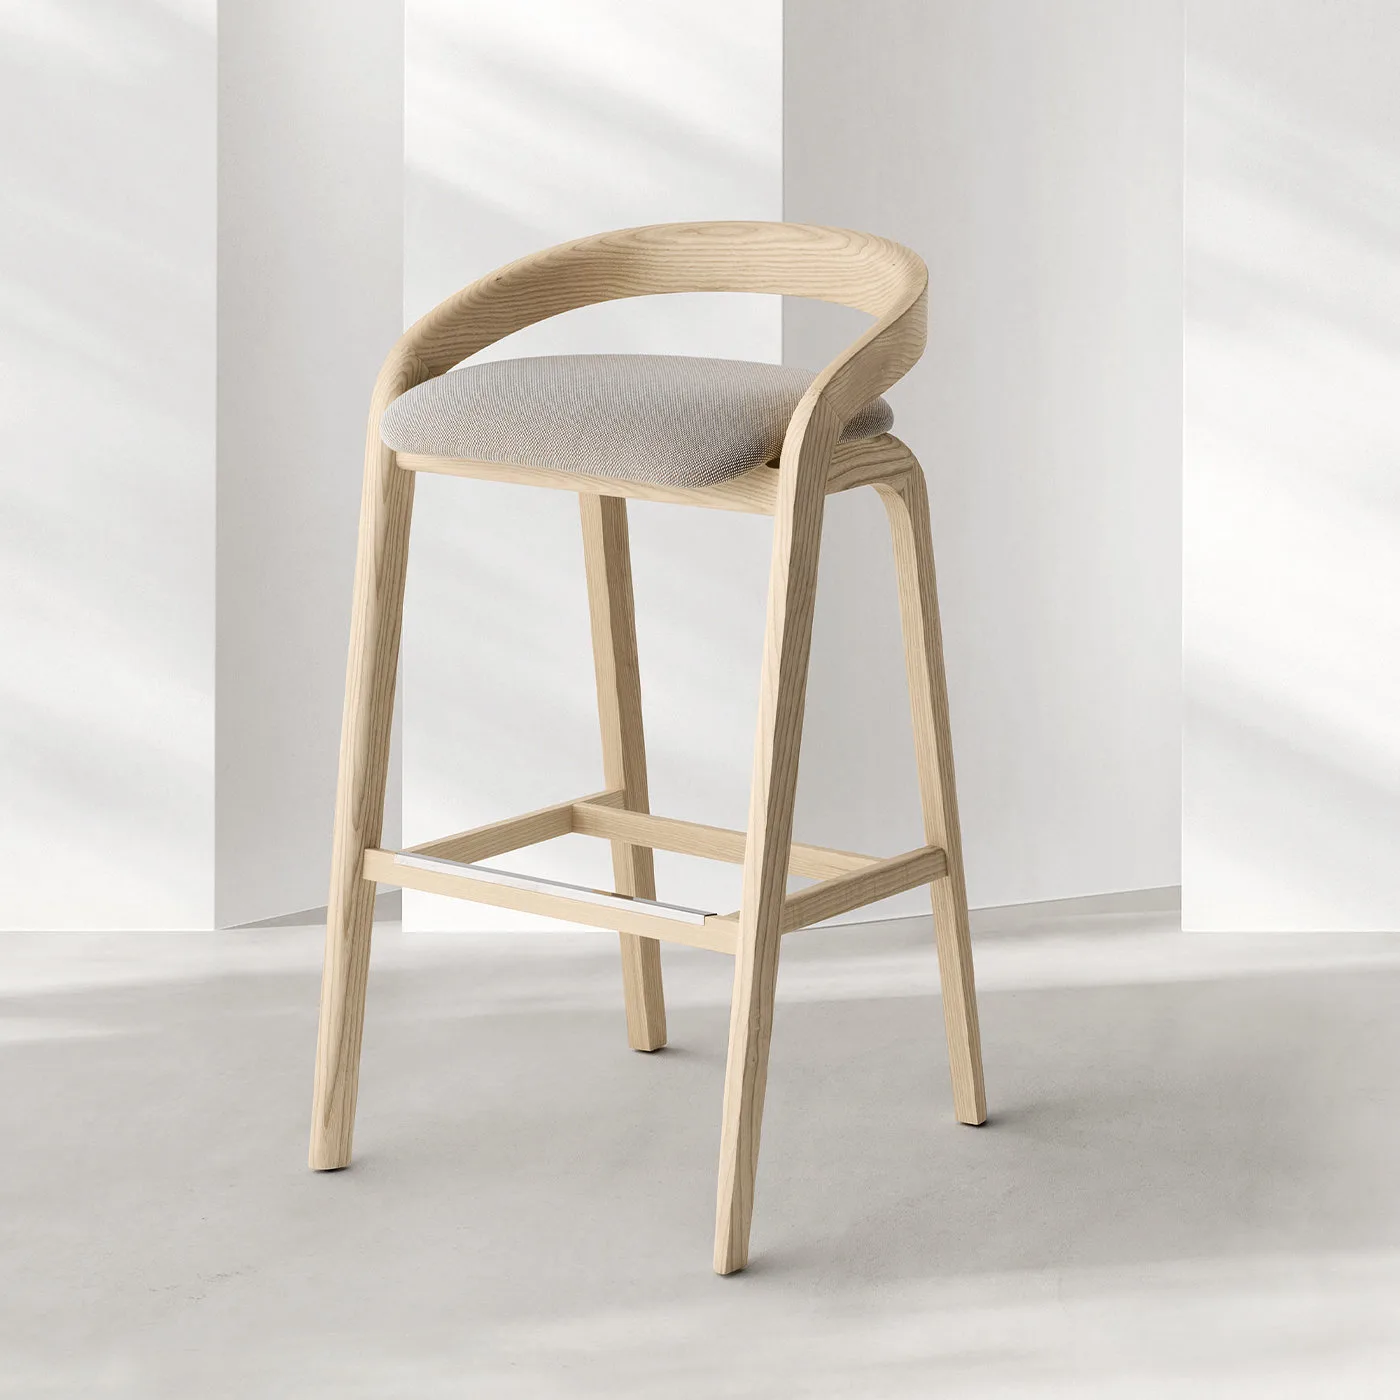 GENEA WHITE ASH BARSTOOL WITH GRAY UPHOLSTERED SEAT